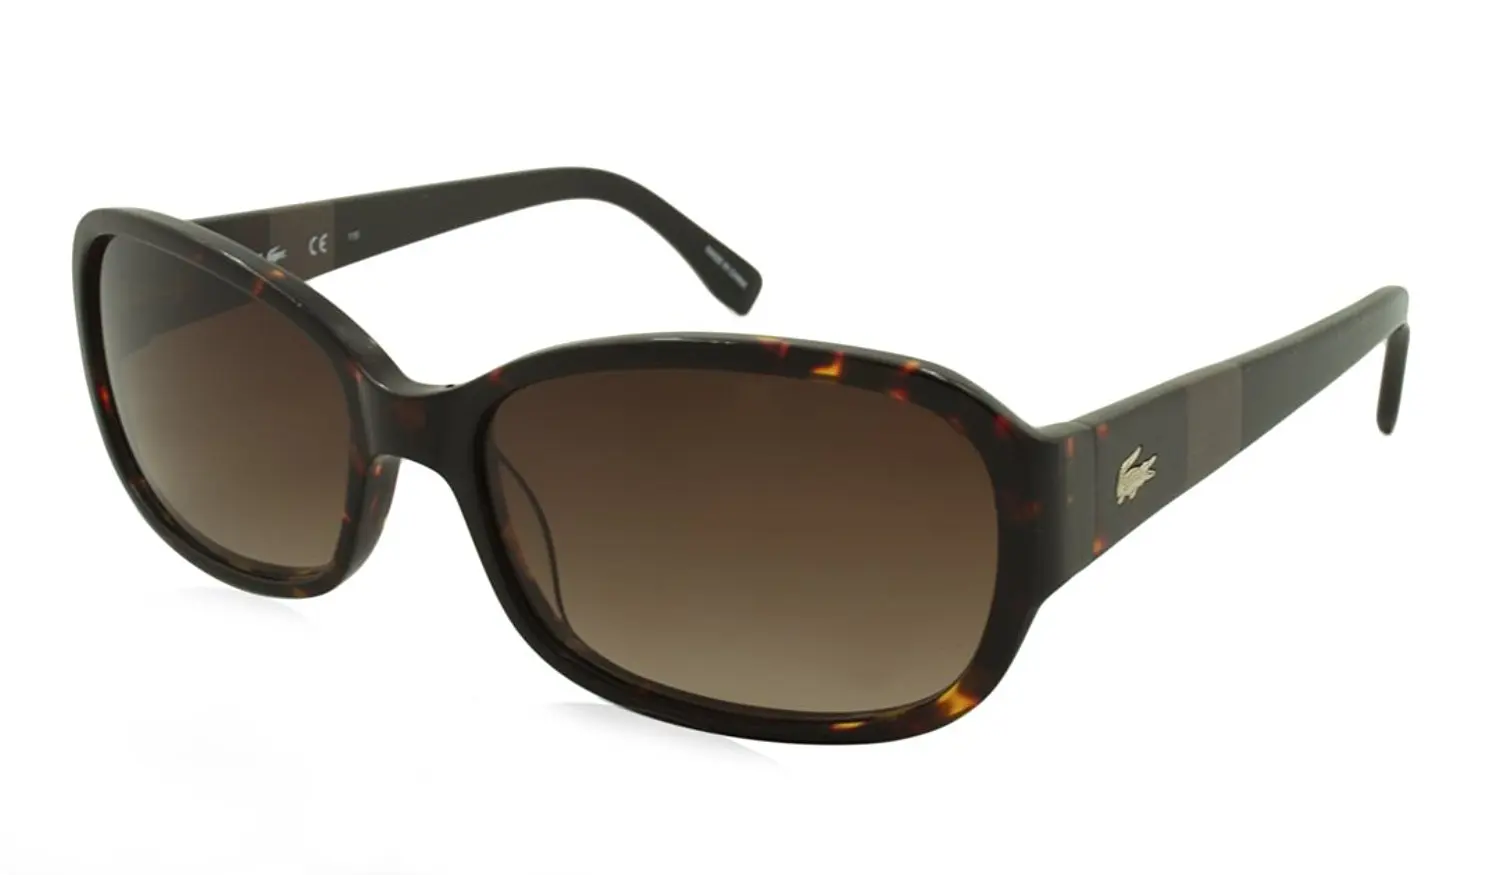 lacoste shades price